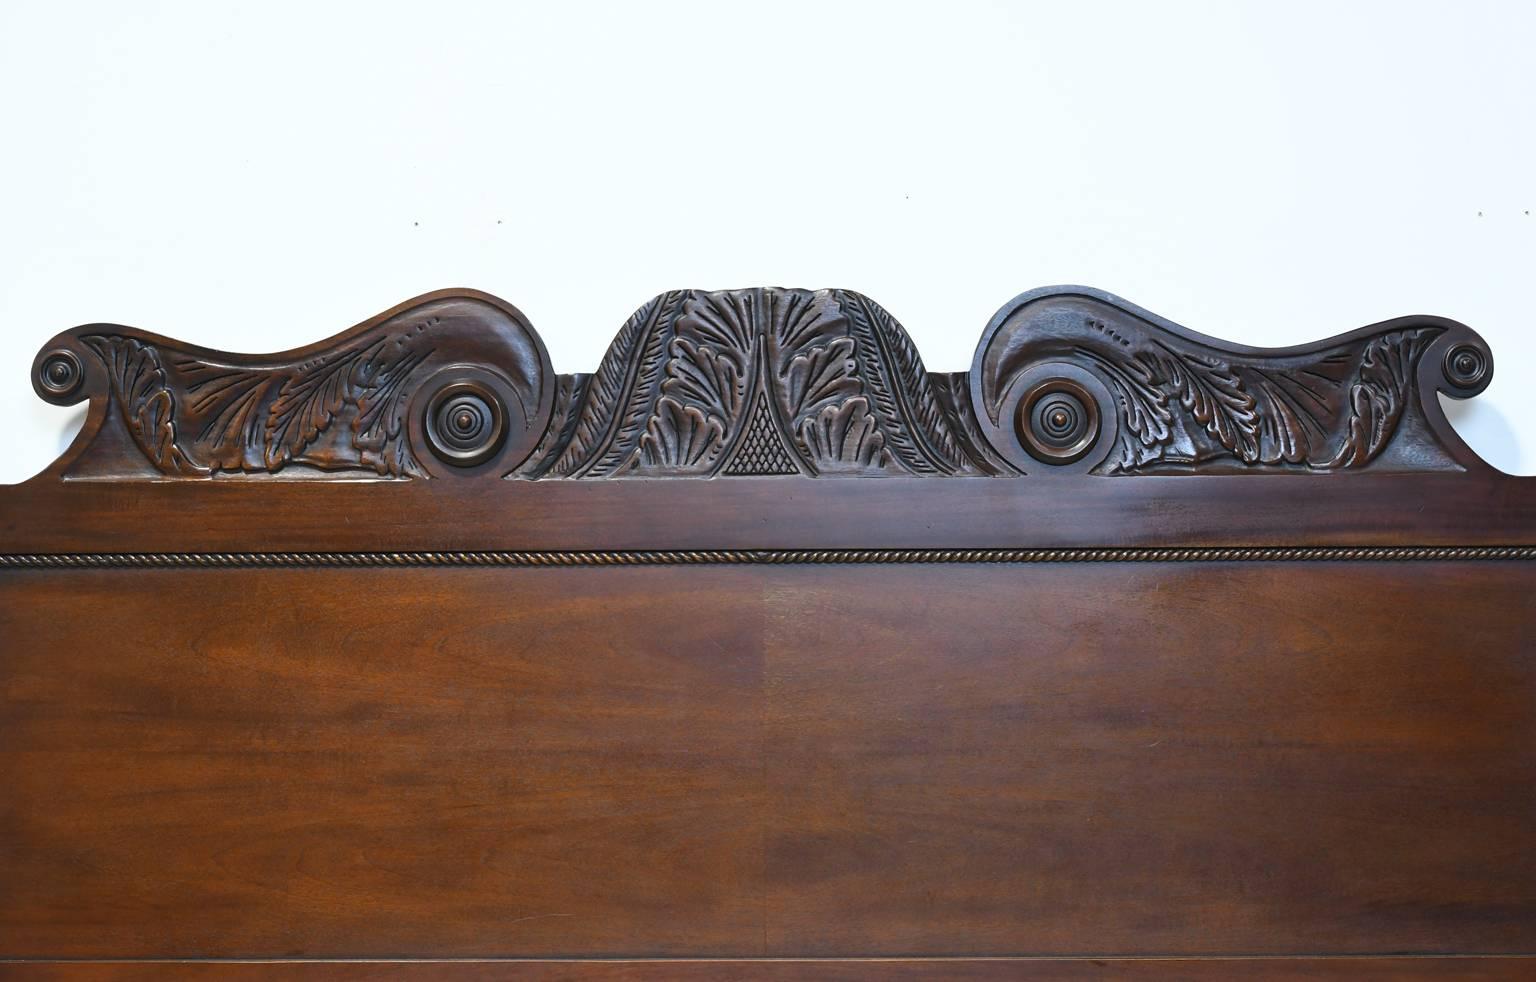 British Colonial Ralph Lauren Carved Four-Poster King-Size Bed in Solid Mahogany